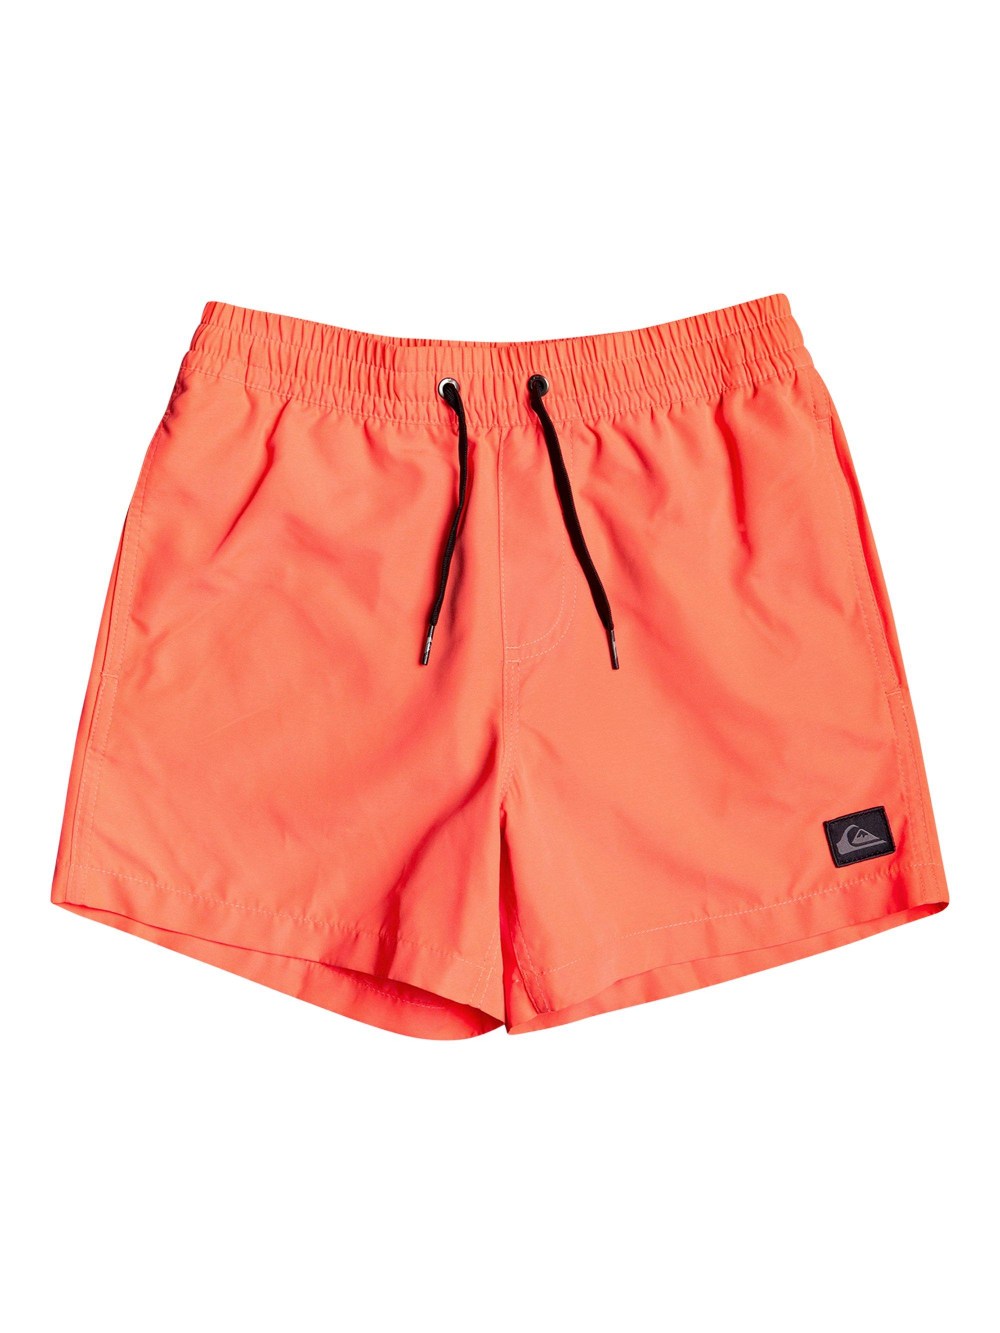 BAADOR EVERYDAY VOLLEY YOUTH 13 POLYESTER FIERY CORAL